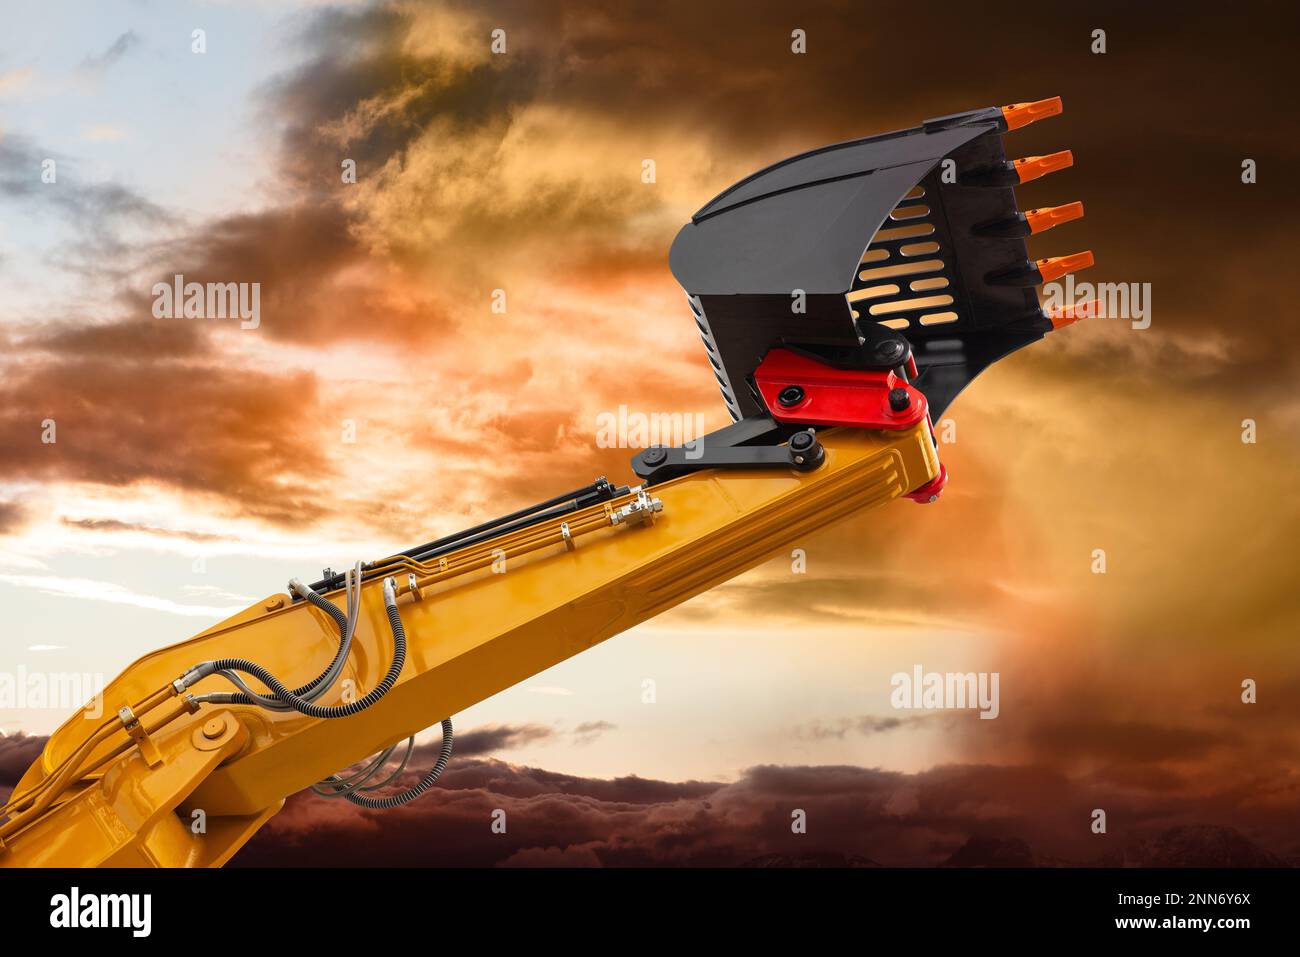 excavator is digging and working at construction site Stock Photo